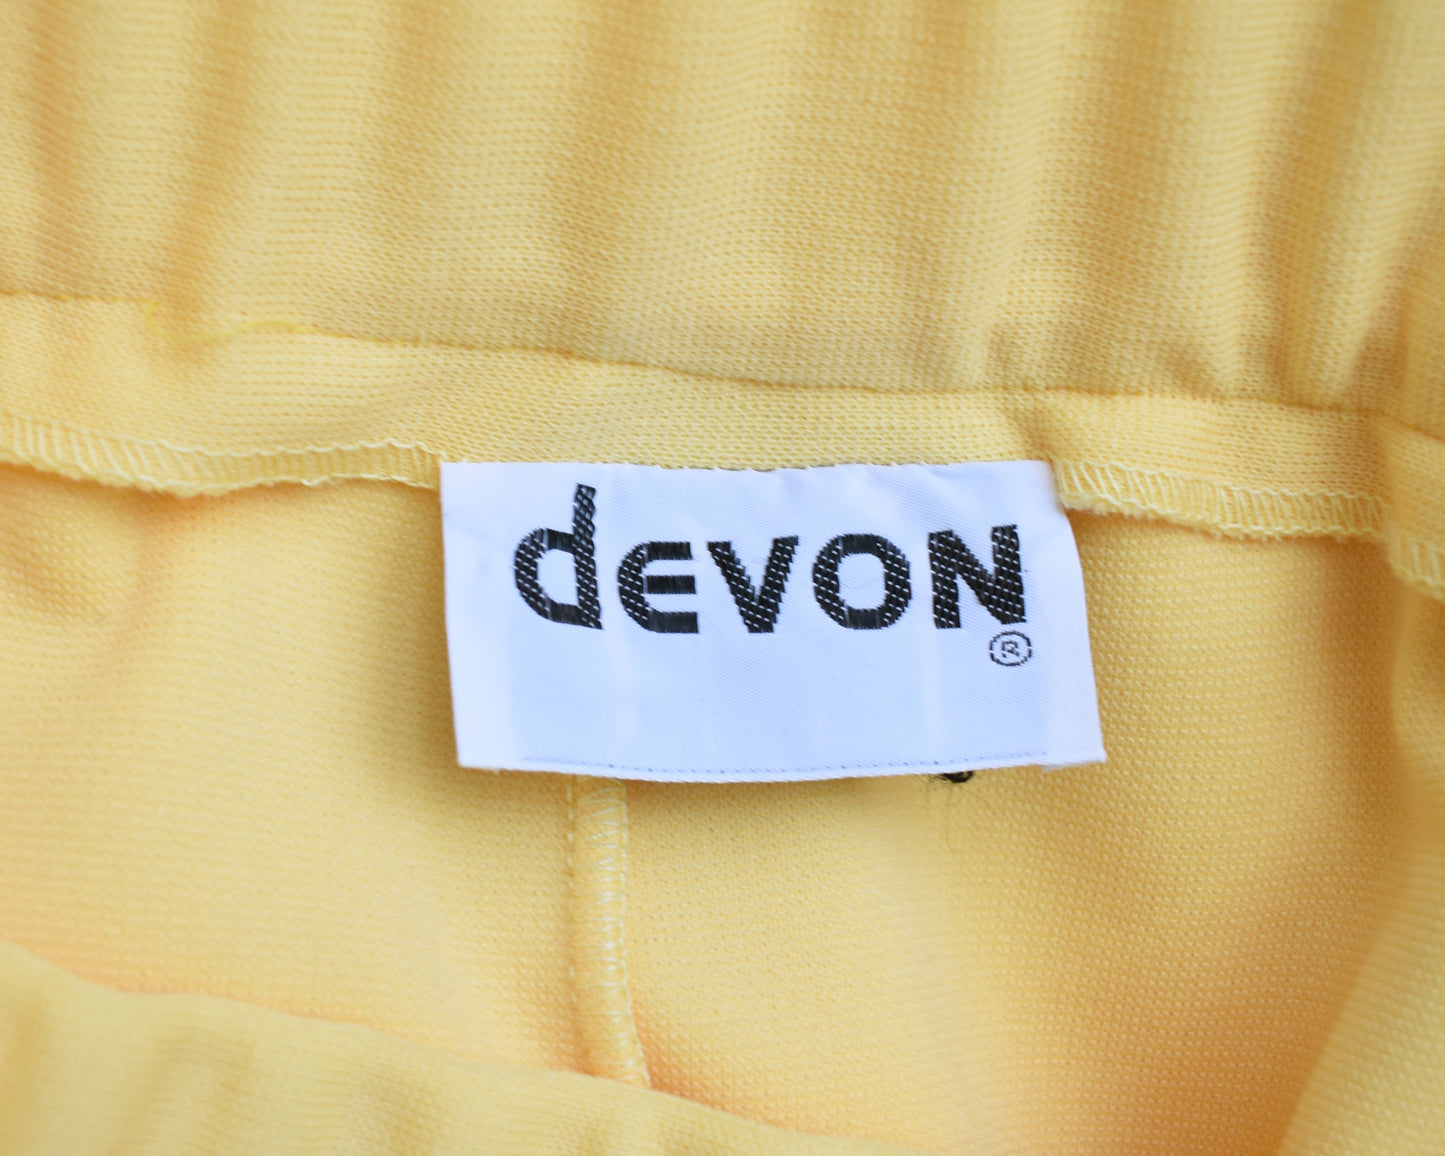 close up of the tag which says devon